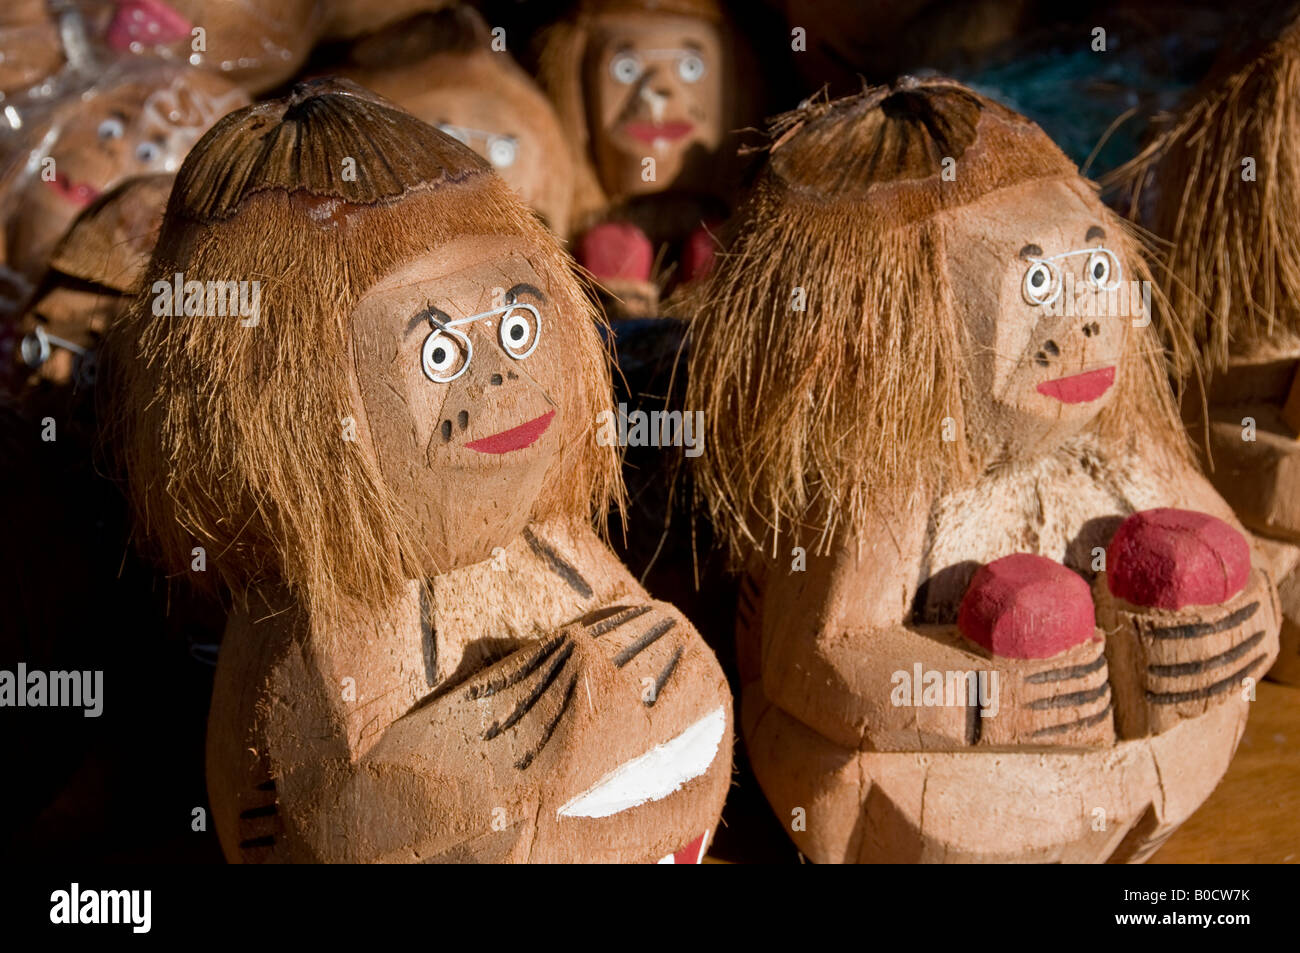 Key West souvenirs made of coco-nuts Stock Photo